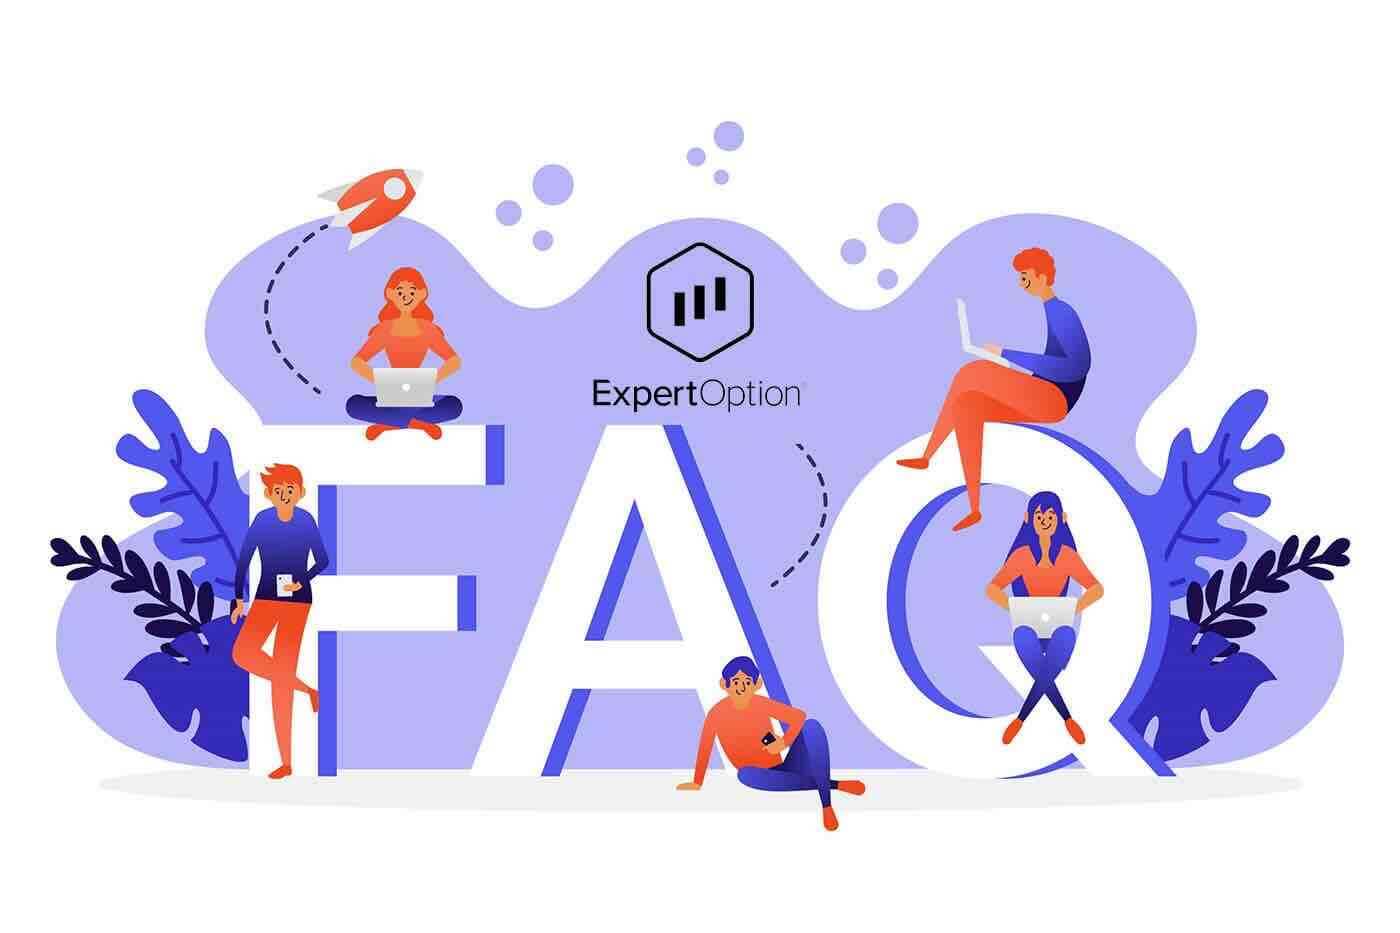 ExpertOption Frequently Asked Questions(FAQ)